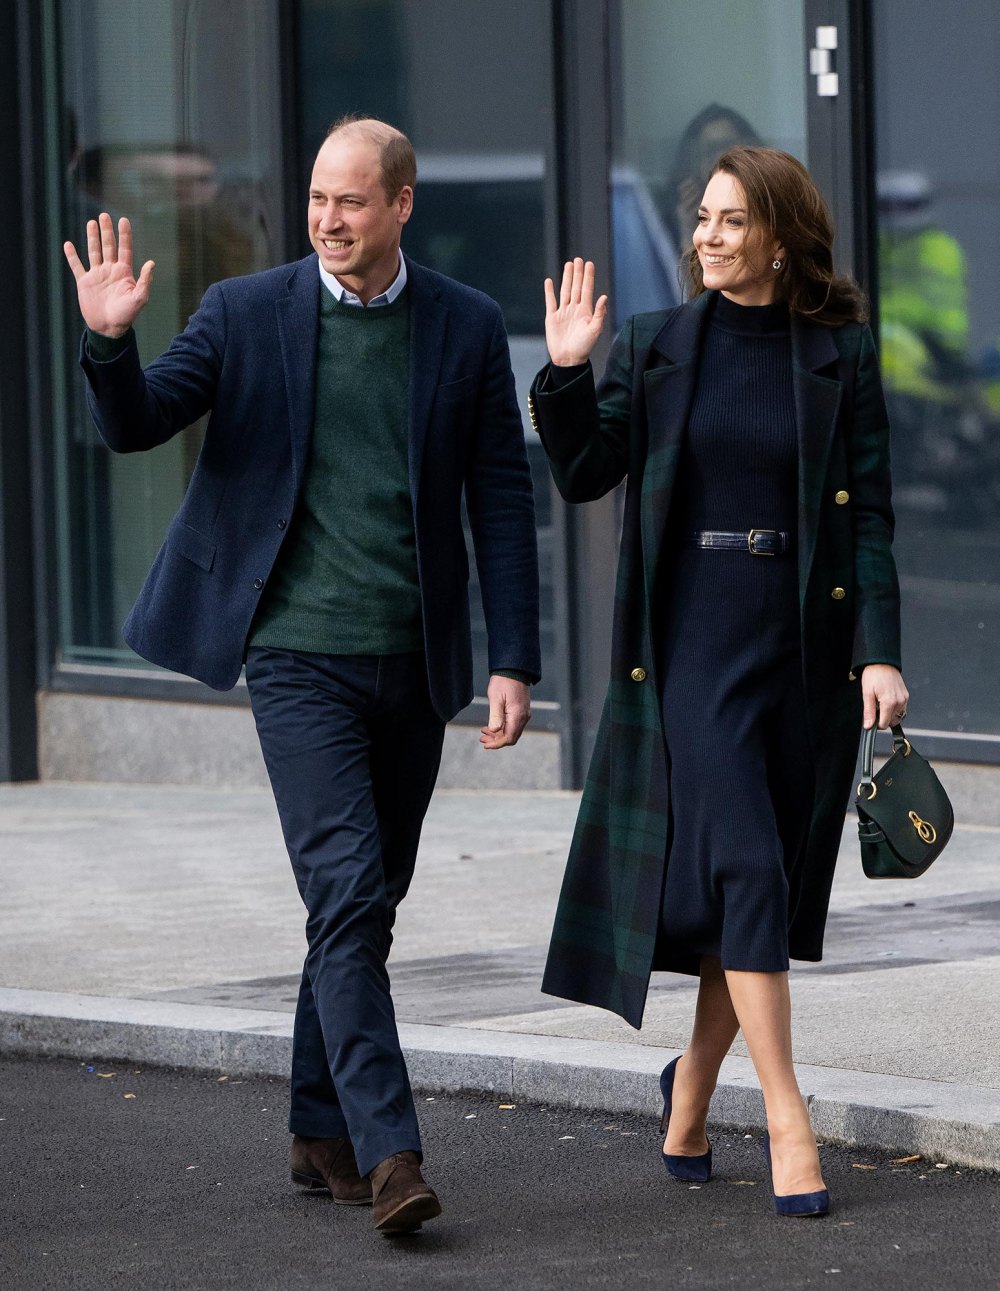 What Kate Middleton Casual Outfit on Latest Public Outing With Prince William Tells Us 2